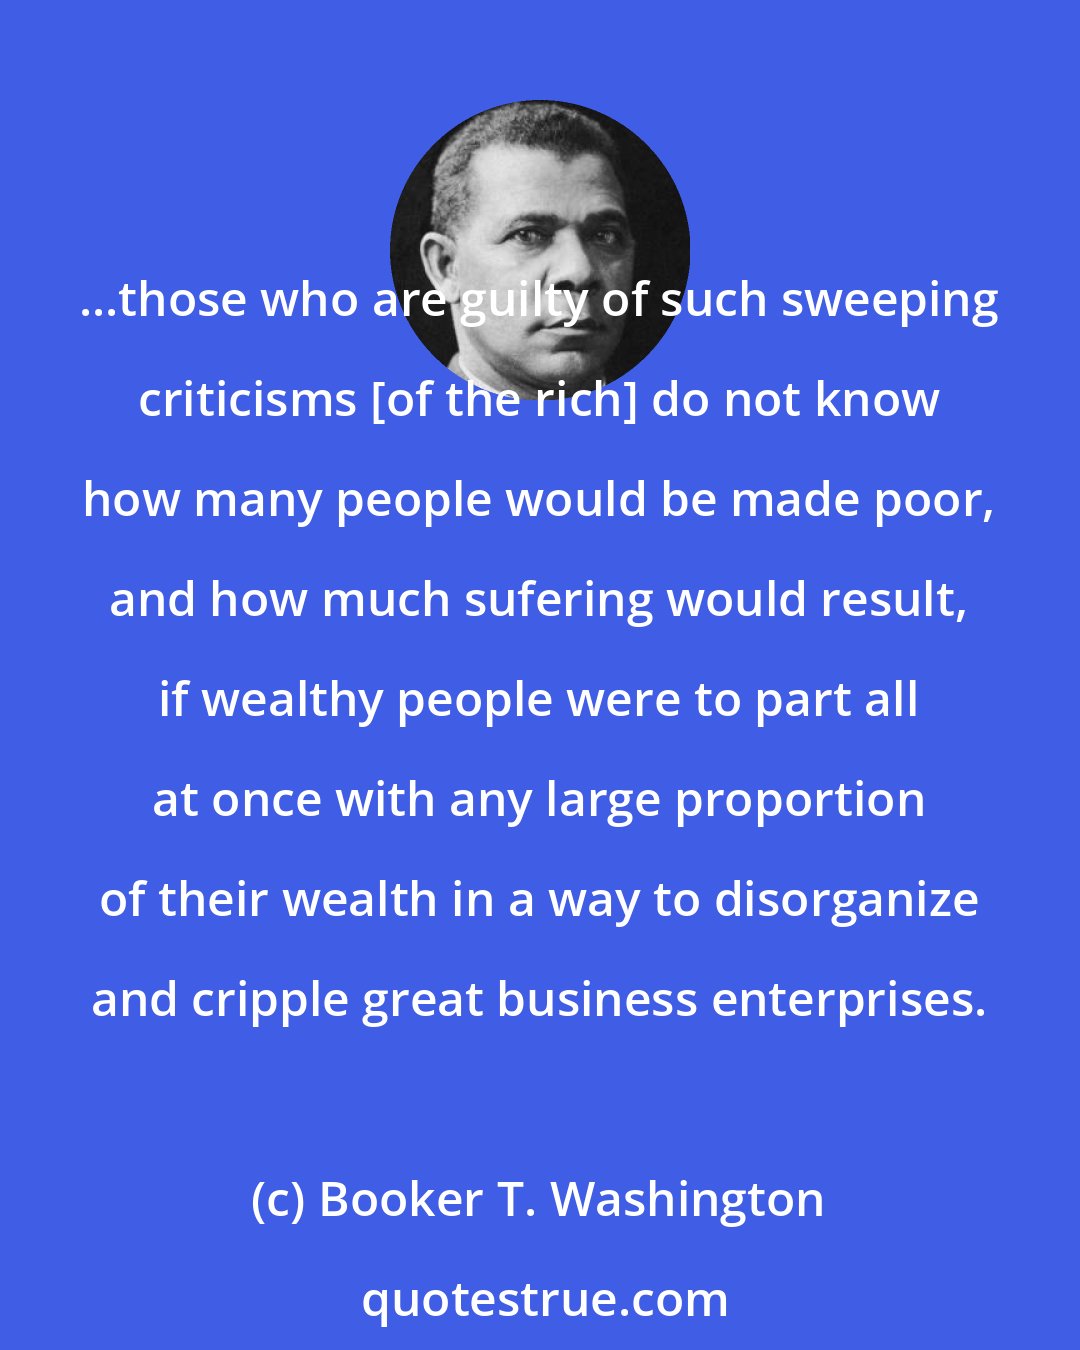 Booker T. Washington: ...those who are guilty of such sweeping criticisms [of the rich] do not know how many people would be made poor, and how much sufering would result, if wealthy people were to part all at once with any large proportion of their wealth in a way to disorganize and cripple great business enterprises.